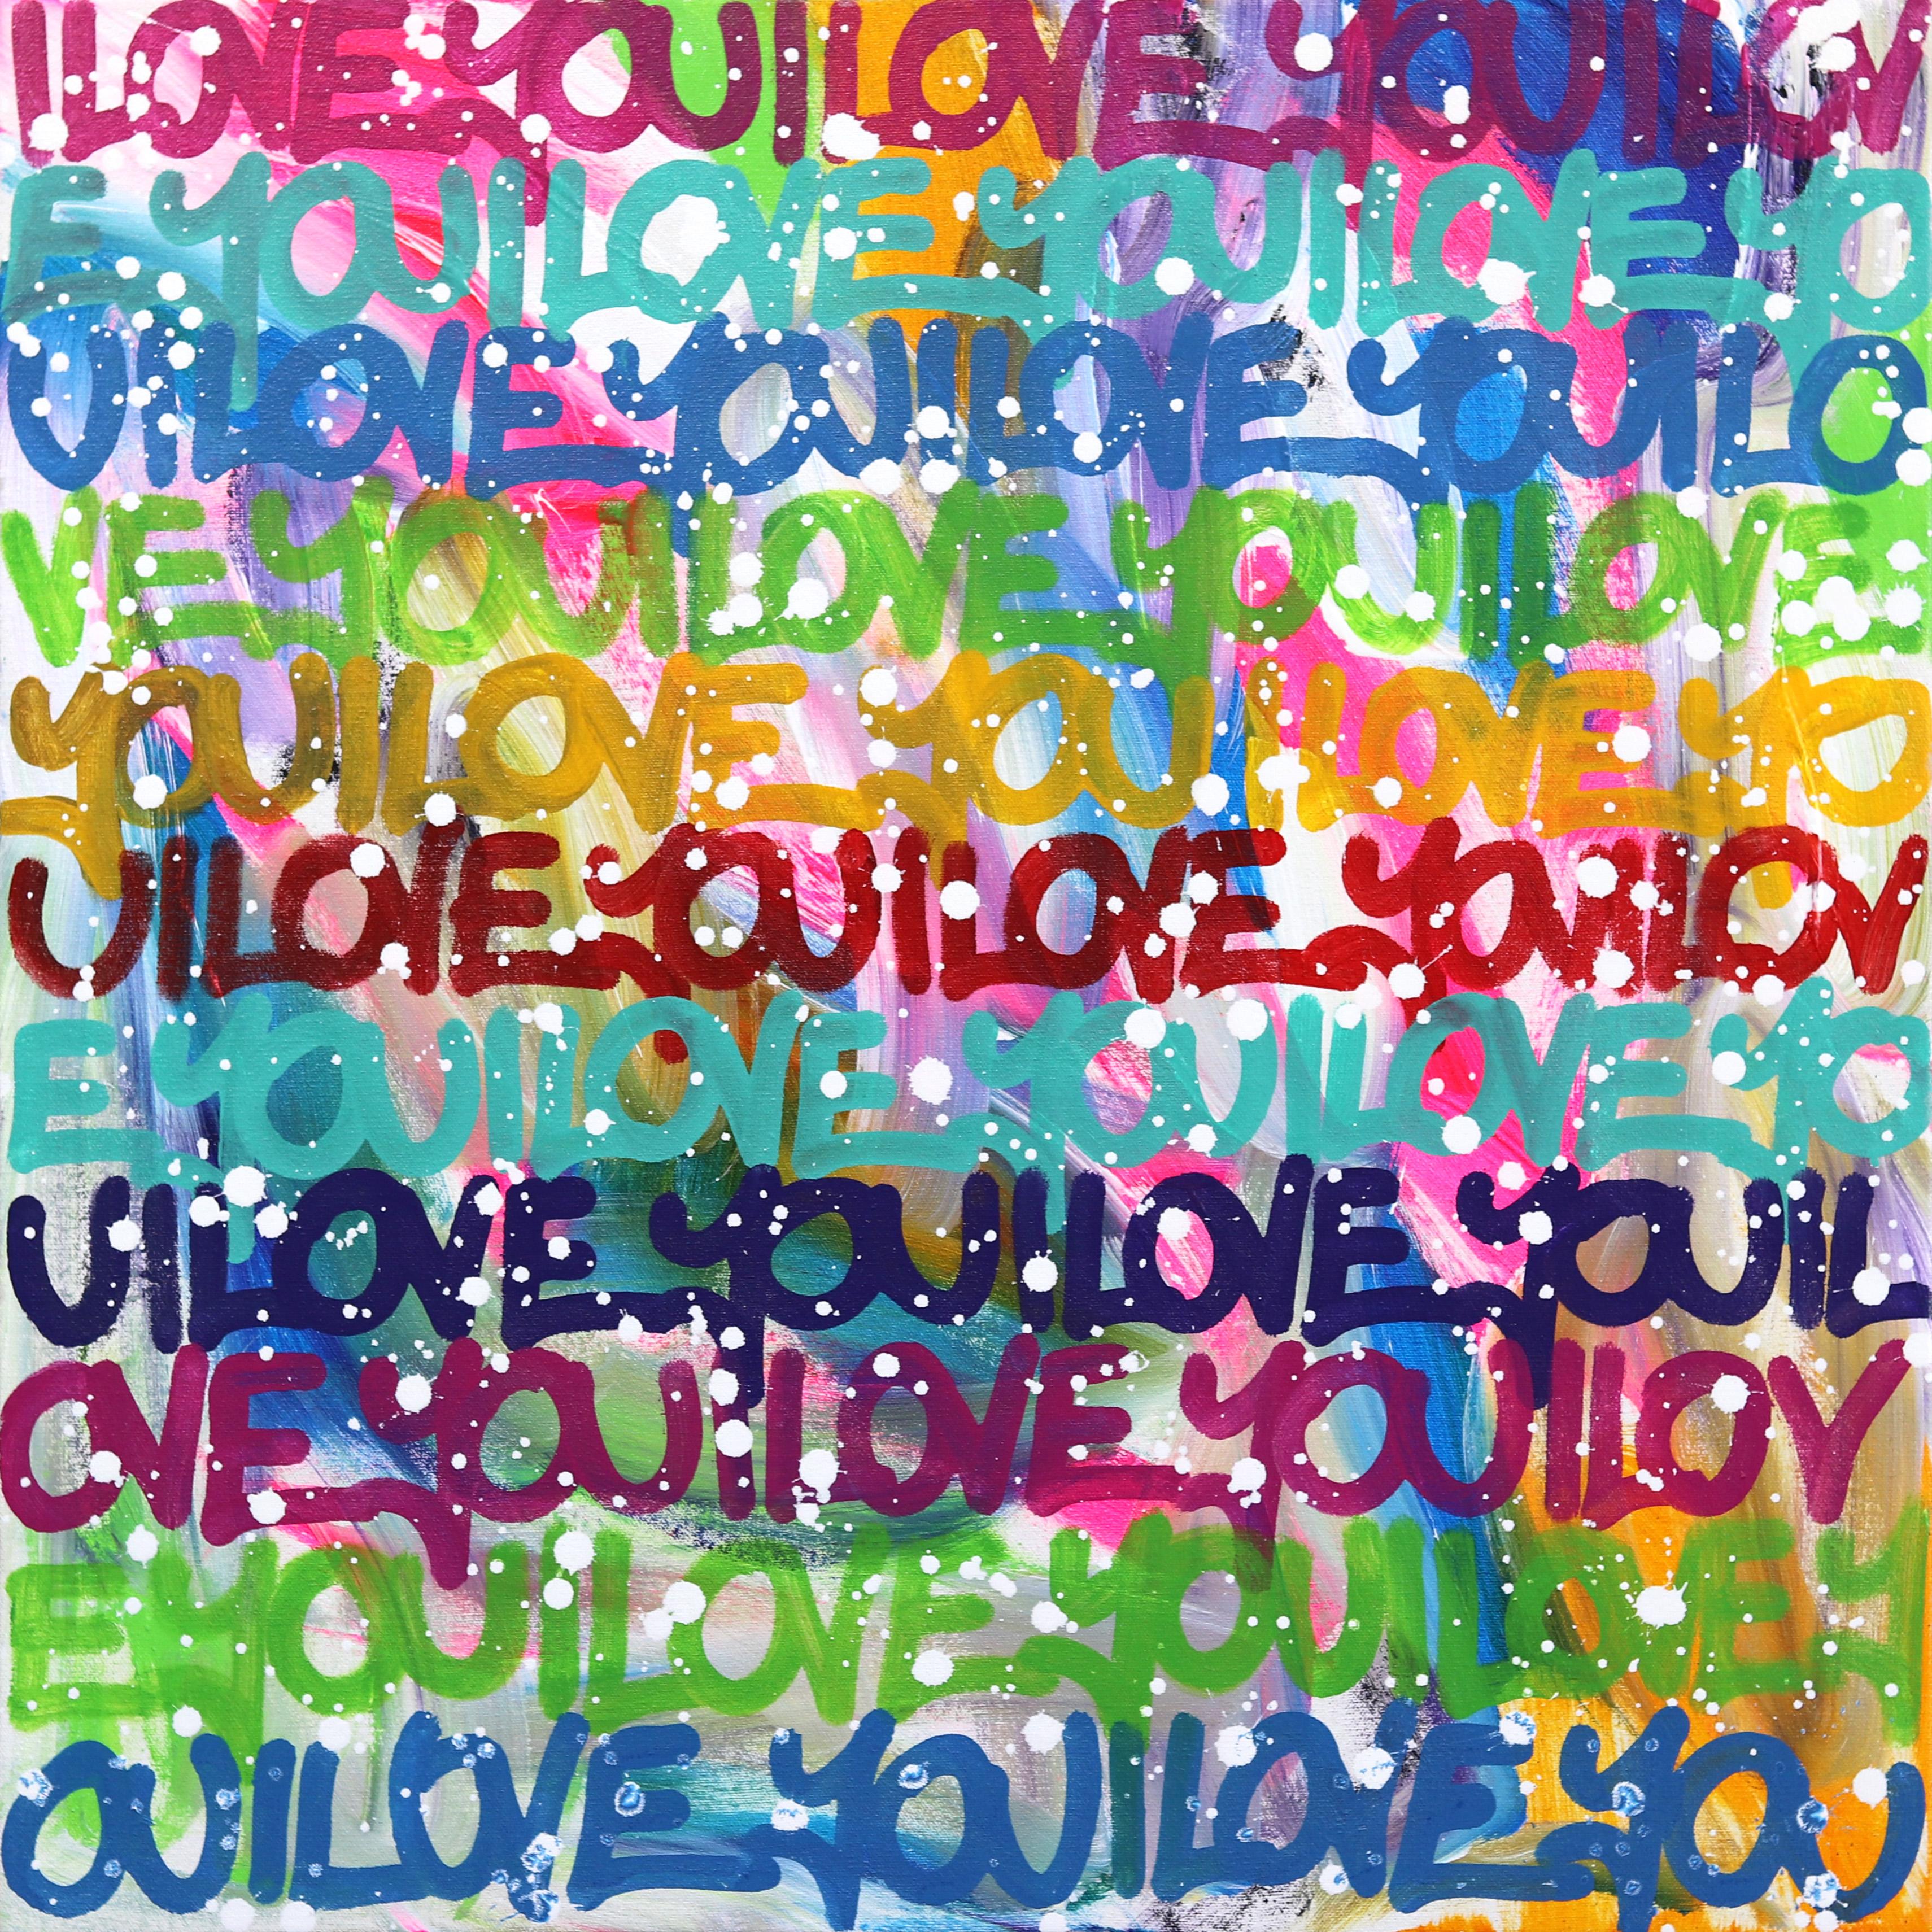 Amber Goldhammer Abstract Painting - Show Your Colorful Side - Colorful Original Love Graffiti Painting on Canvas